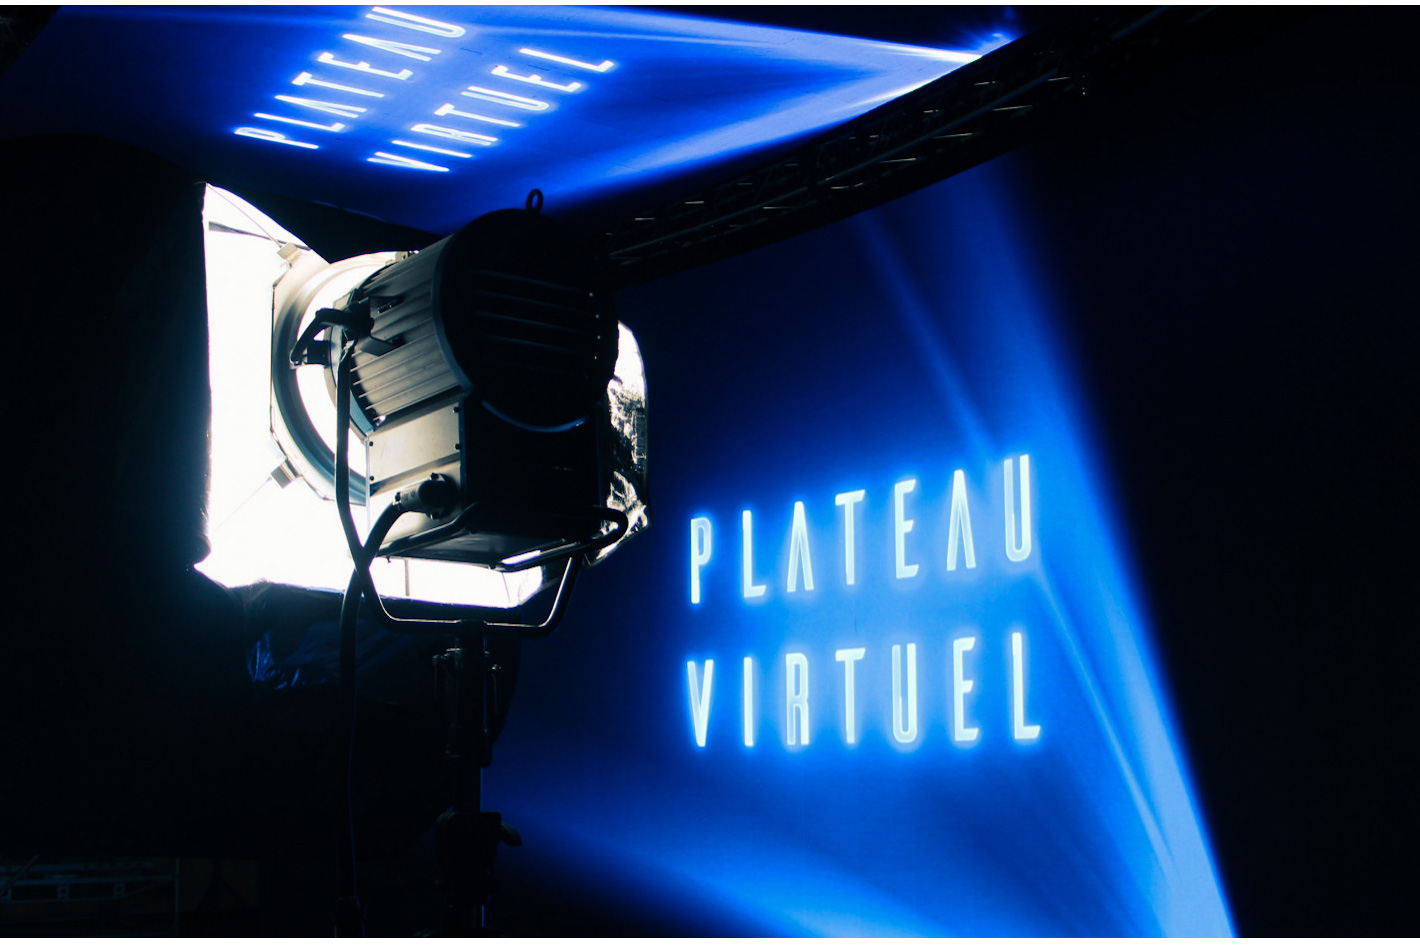 First Virtual Production studio in Europe with Sony Crystal LED